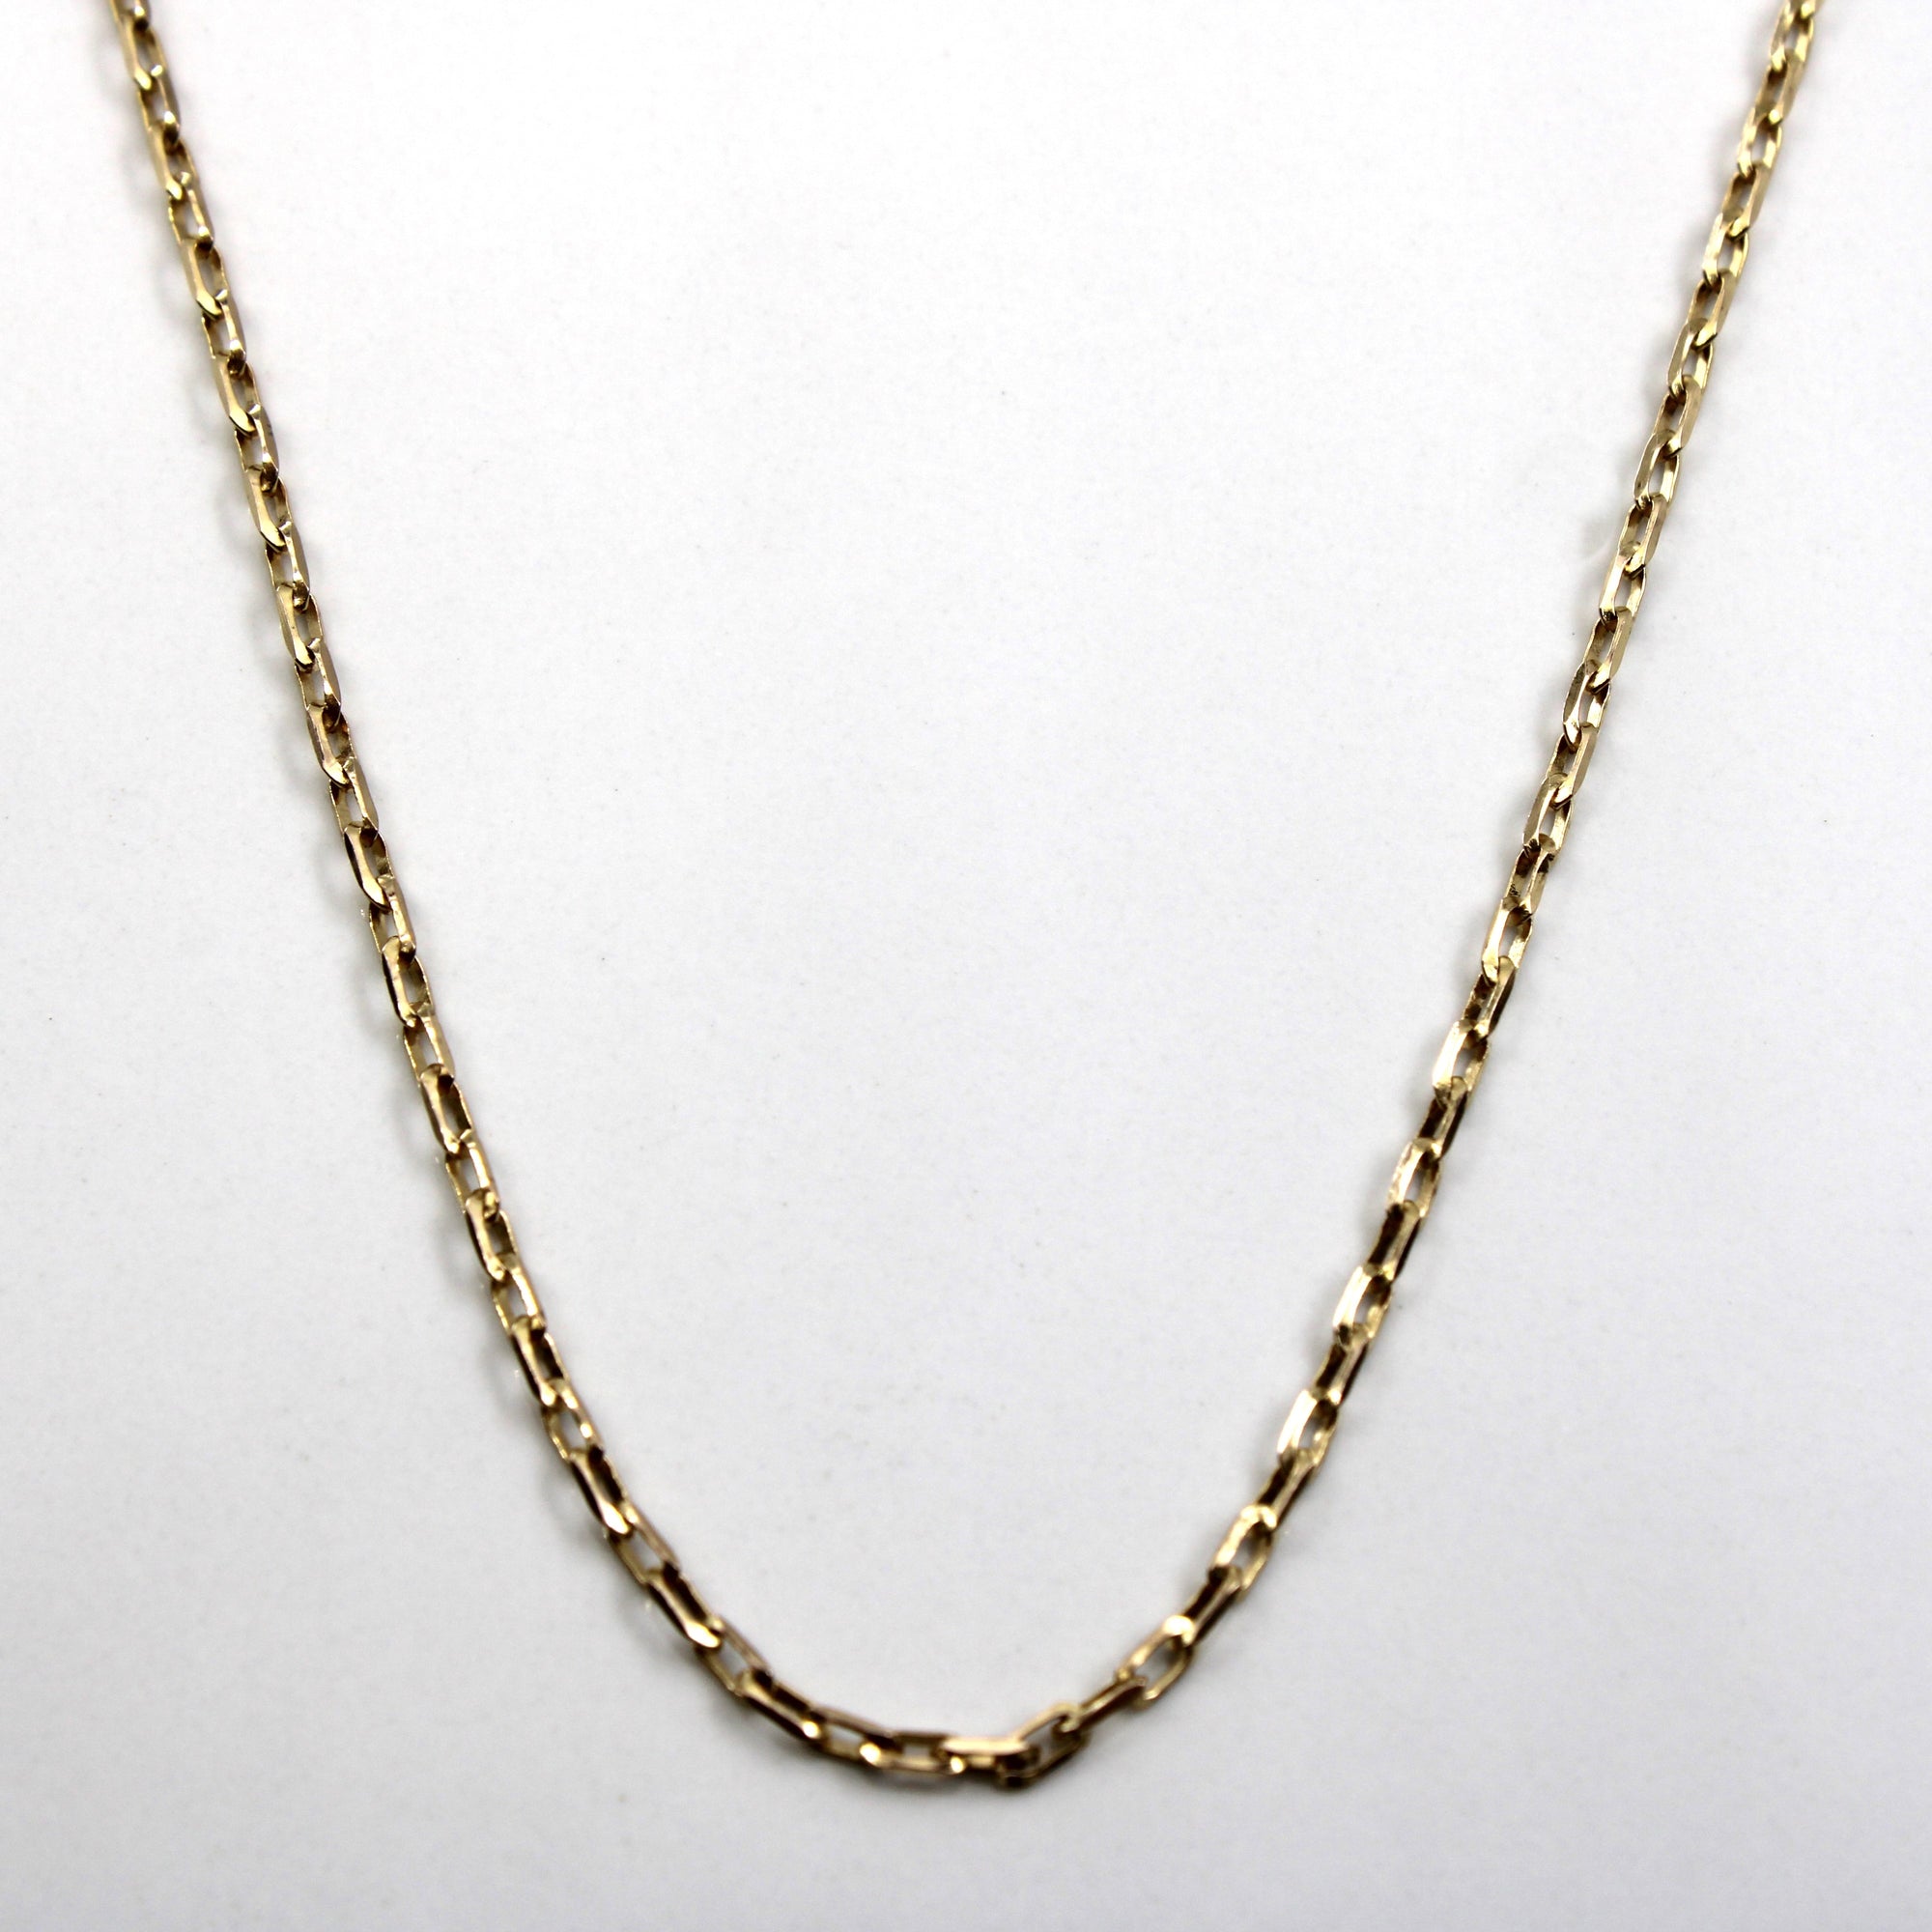 10k Yellow Gold Rolo Link Chain | 27